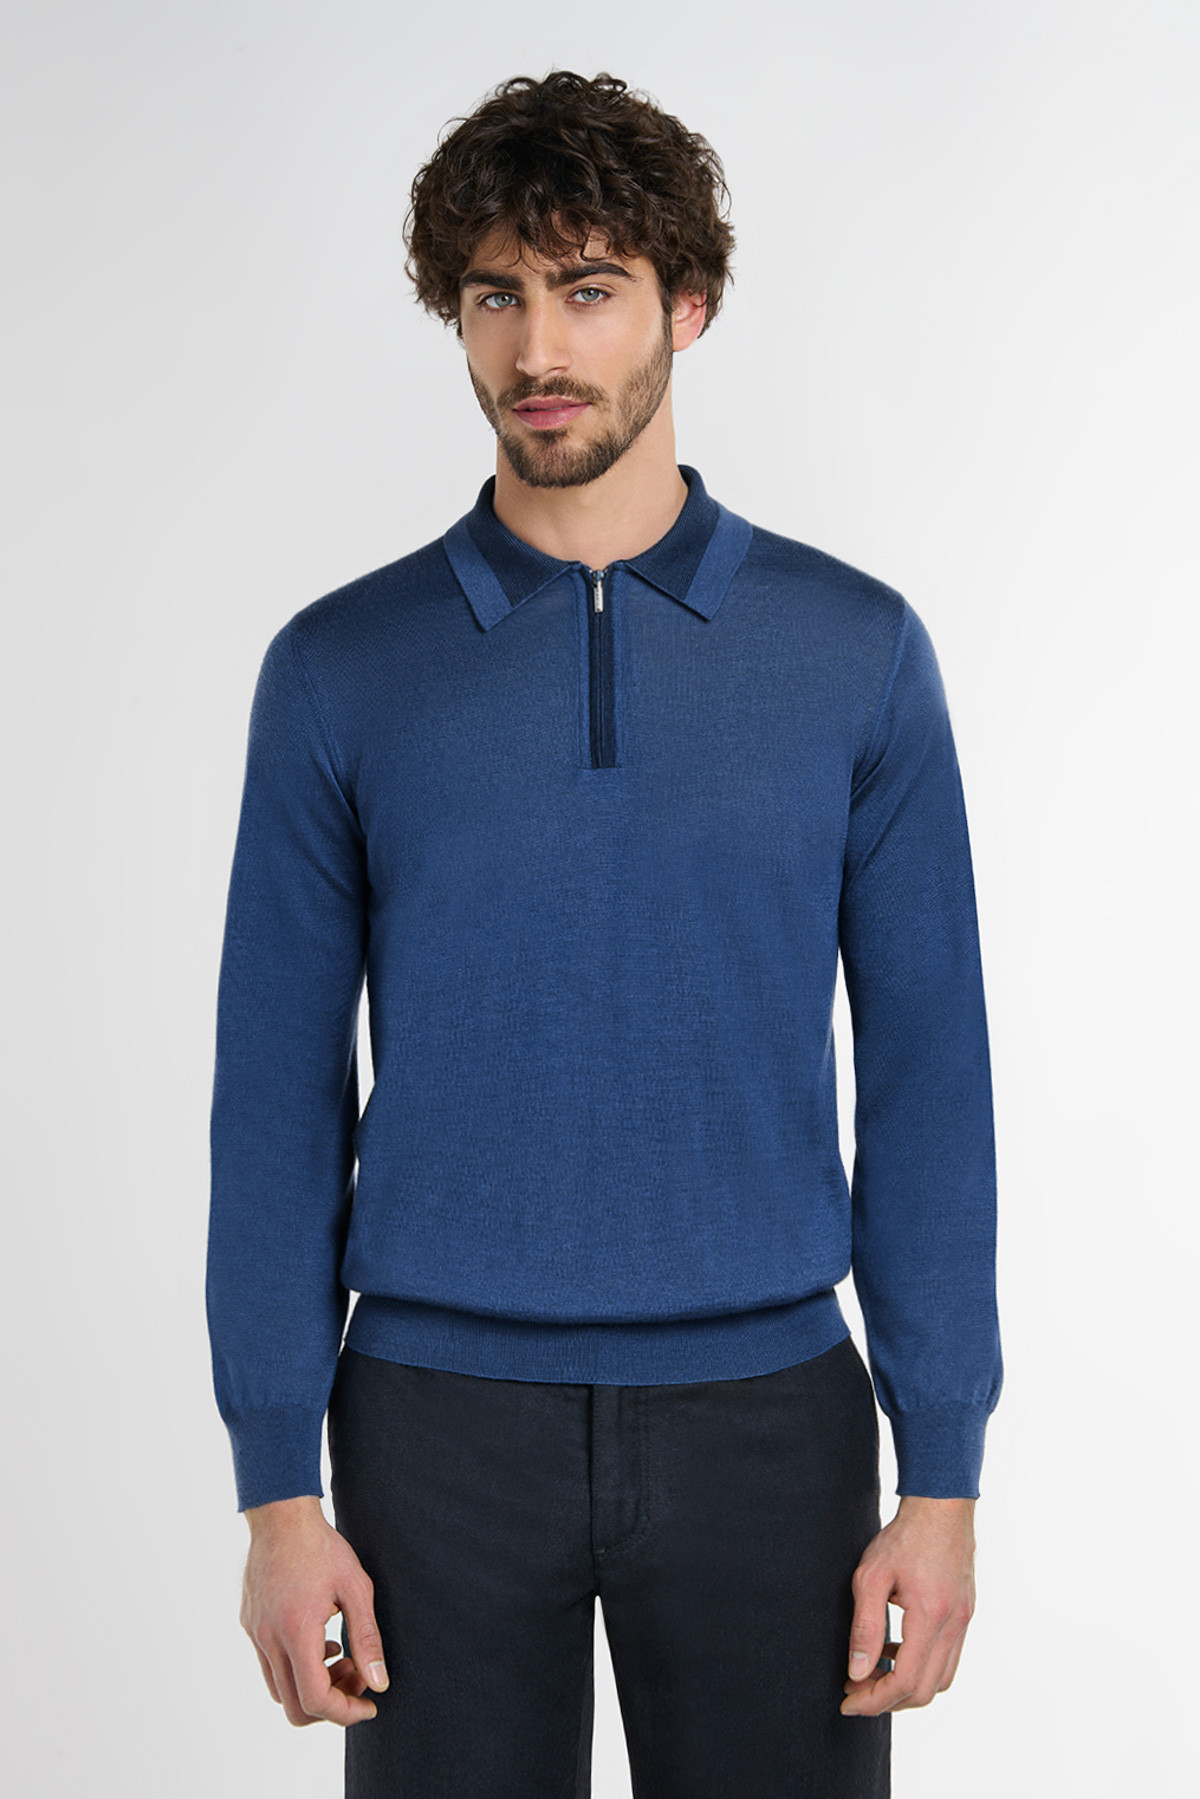 Blue abyss zipped polo shirt, long sleeves